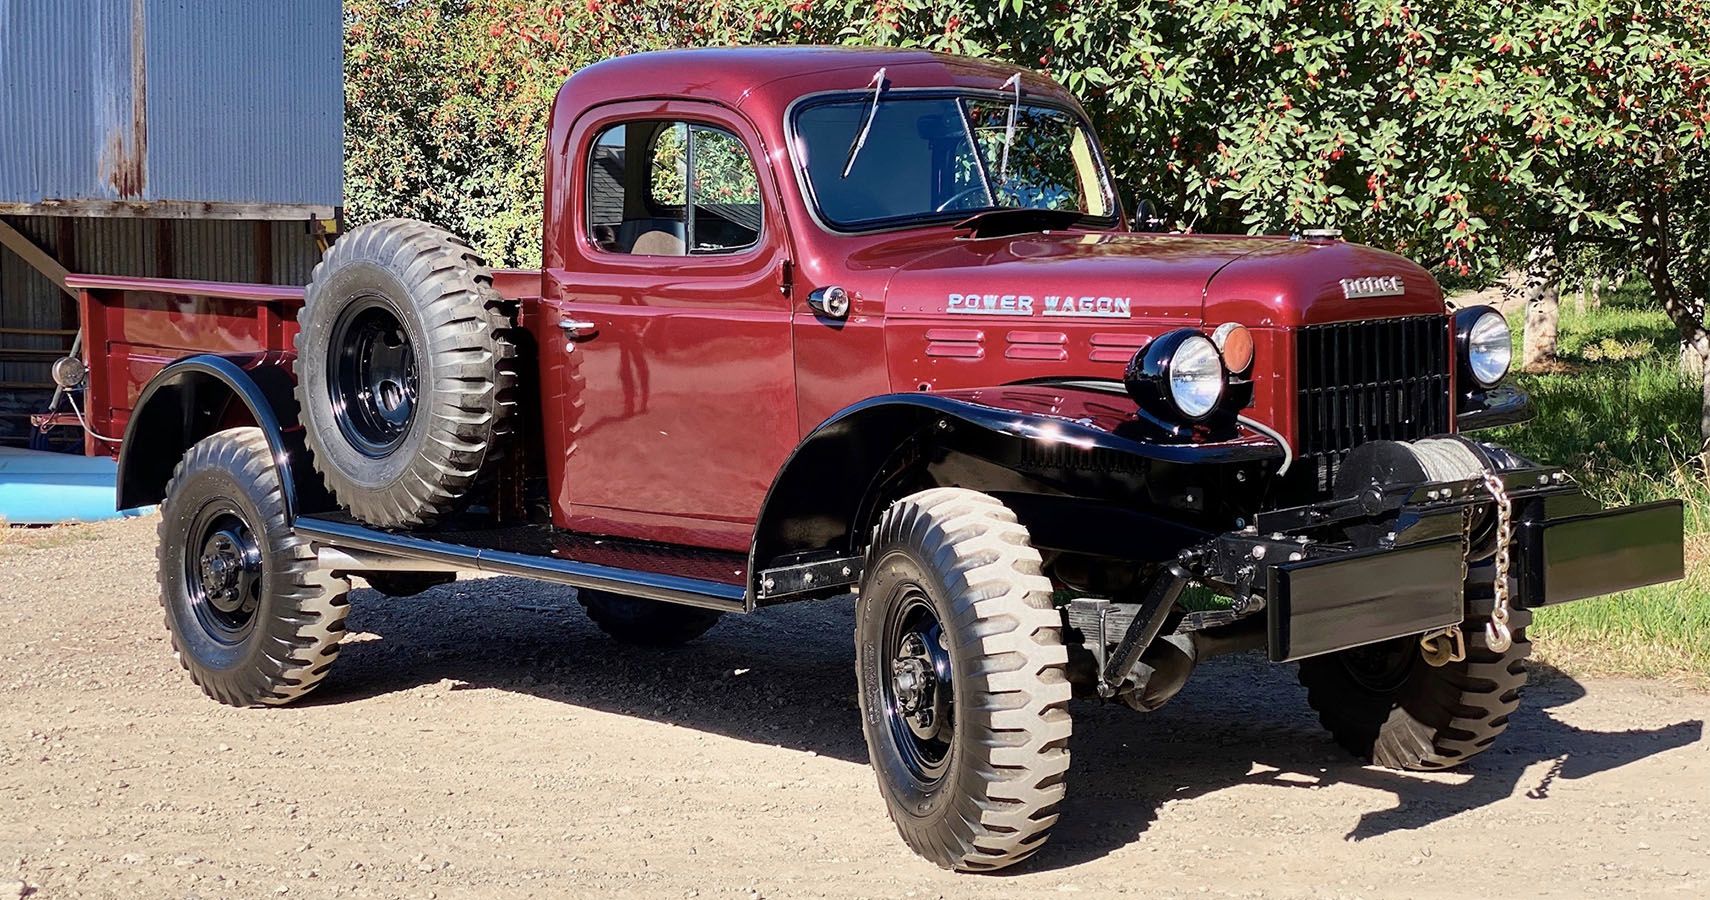 Waiting For The Ram TRX? Get This 1956 Dodge Power Wagon Instead!